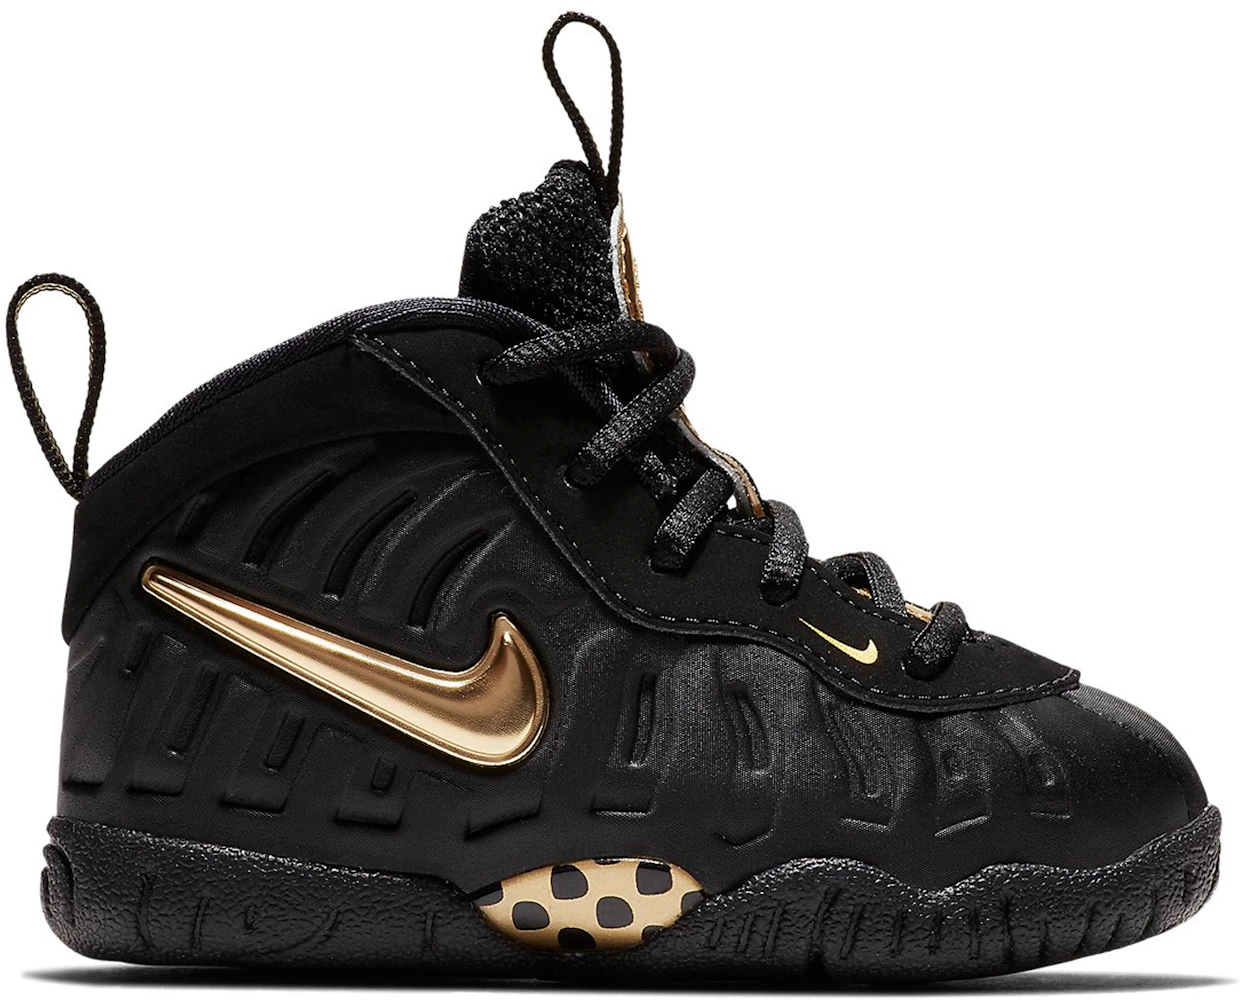 Nike AIR FOAMPOSITE PRO 'USA' – DTLR